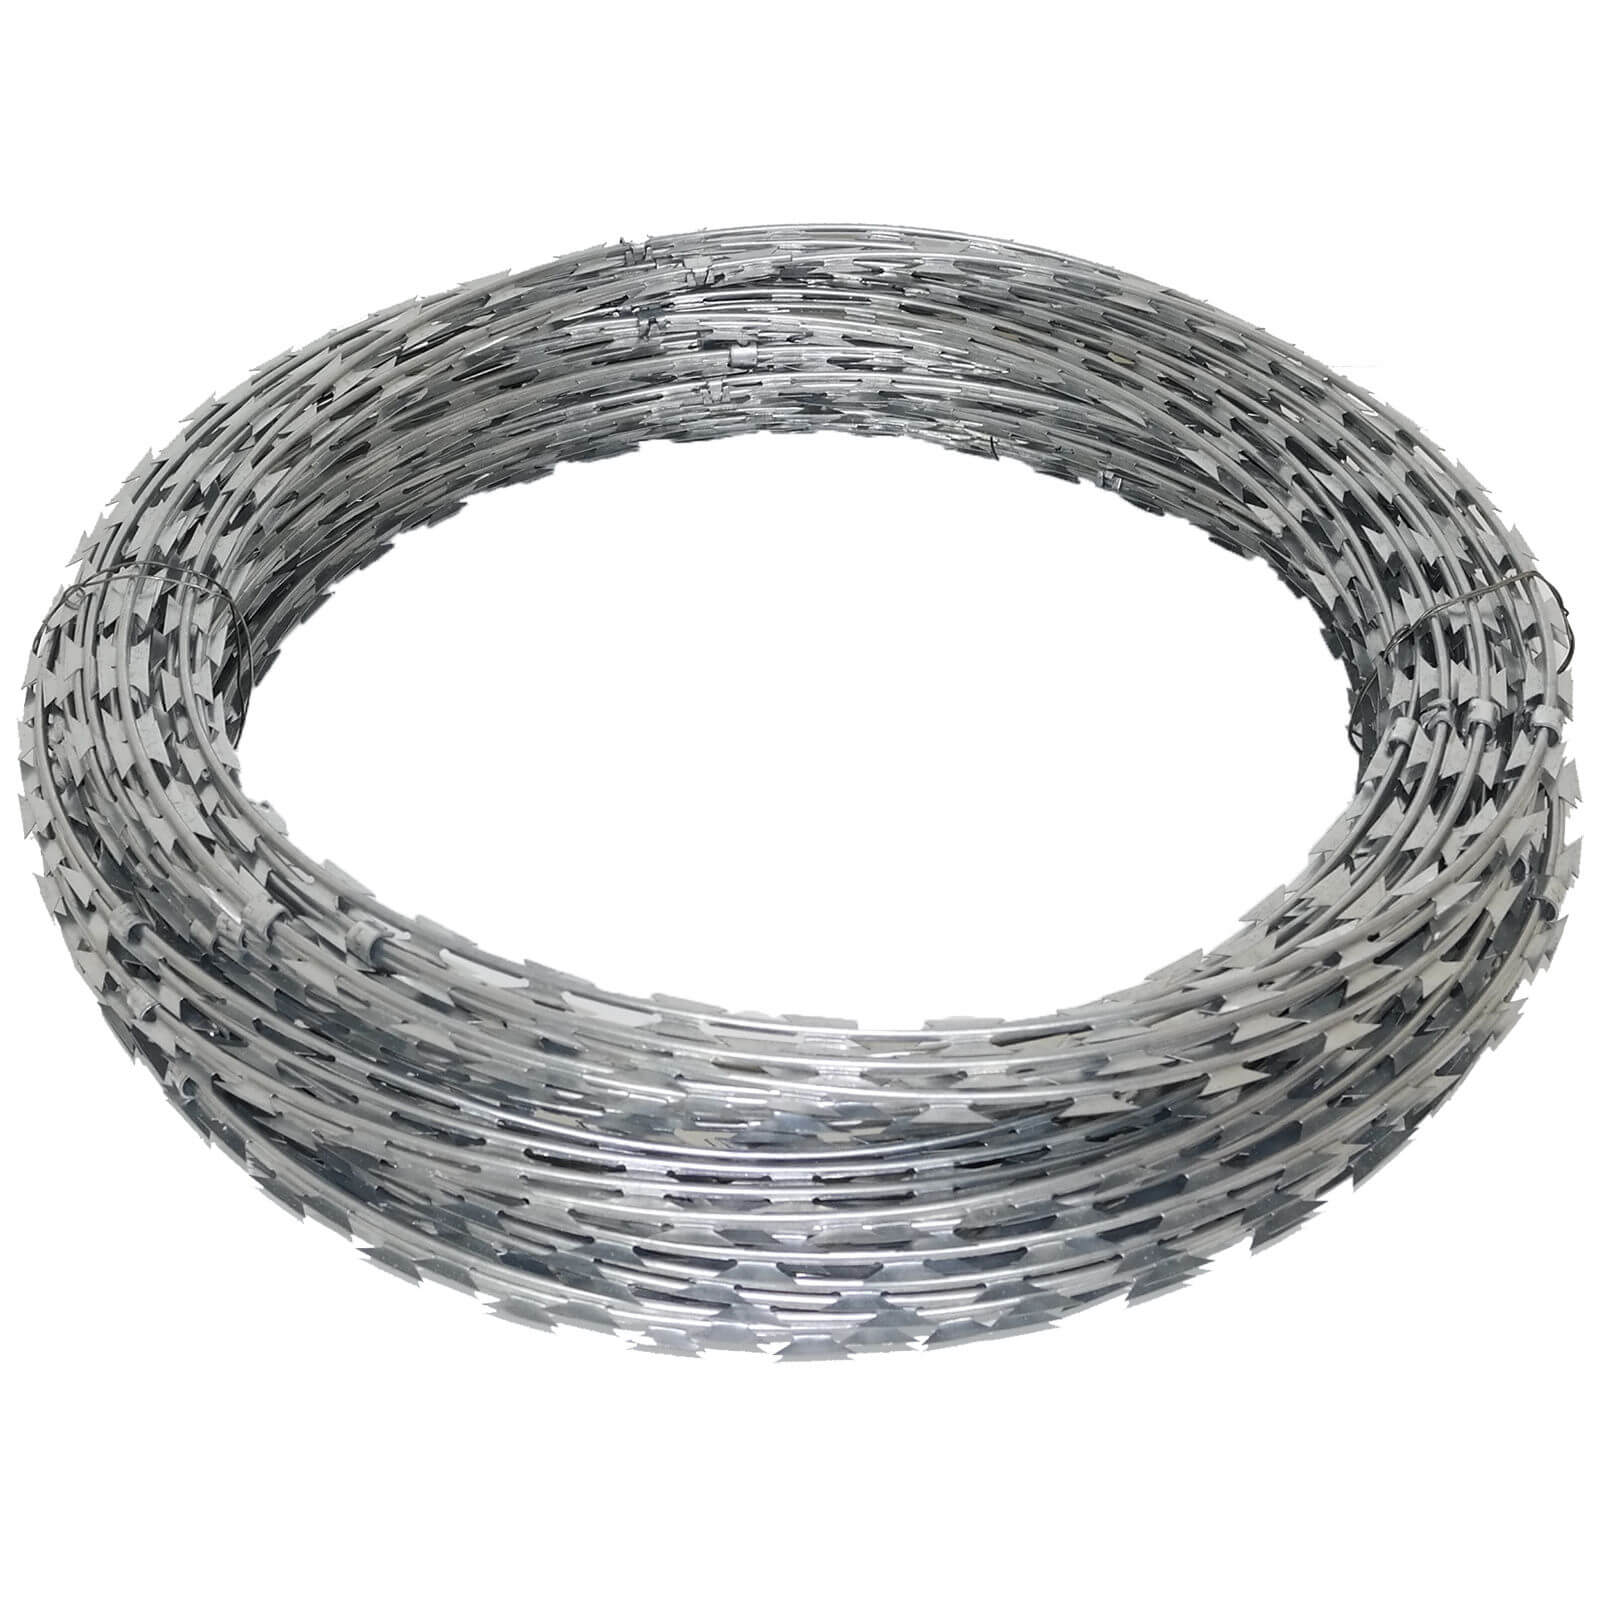 Razor wire fencing: Protecting Residential and Commercial Properties with Wire Fence